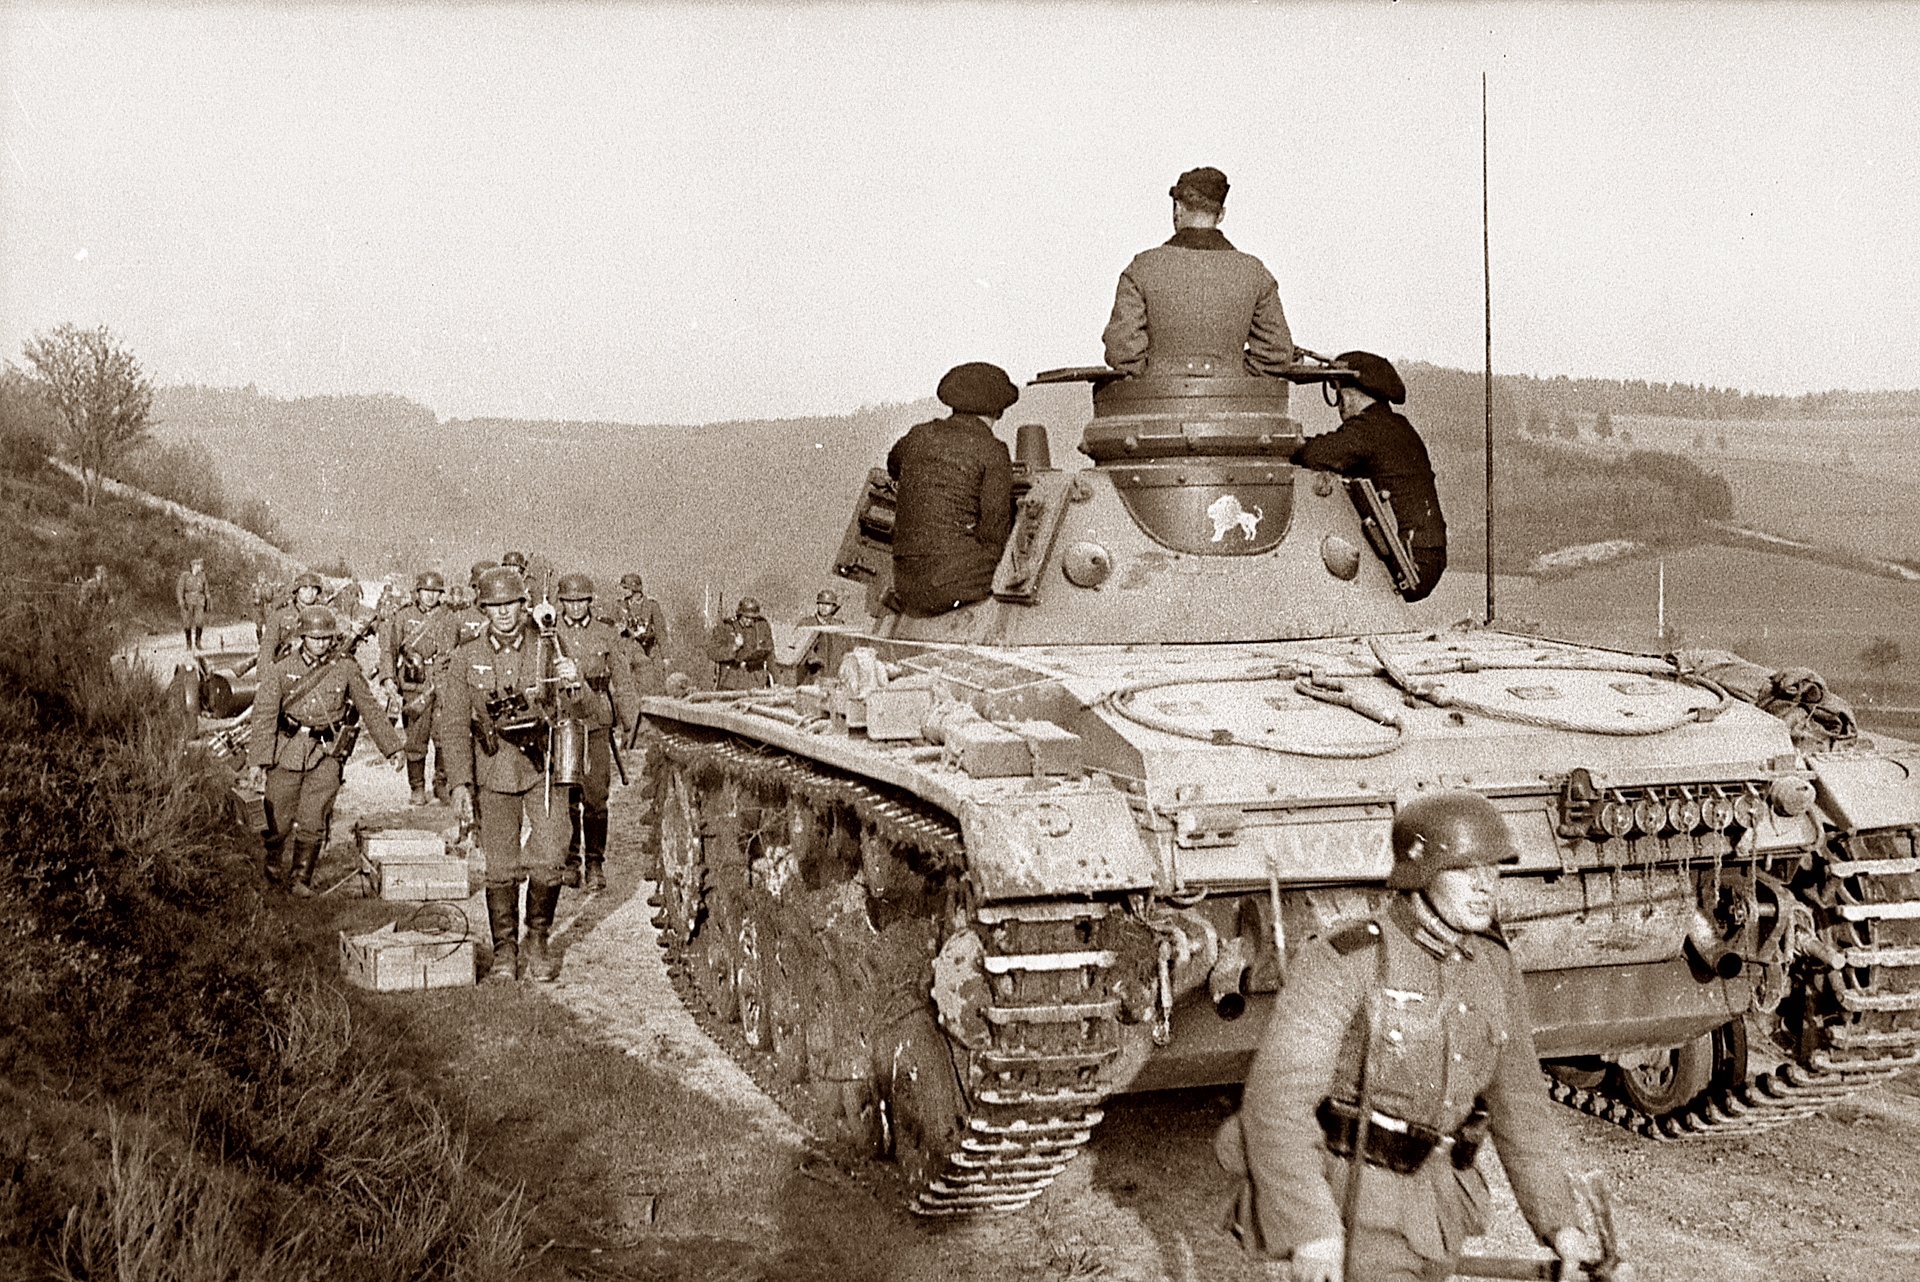 Sepia-toned historical photograph depicting a column of German infantry soldiers marching alongside a Panzer III tank, with crew members positioned on the vehicle as it travels down a rural path.